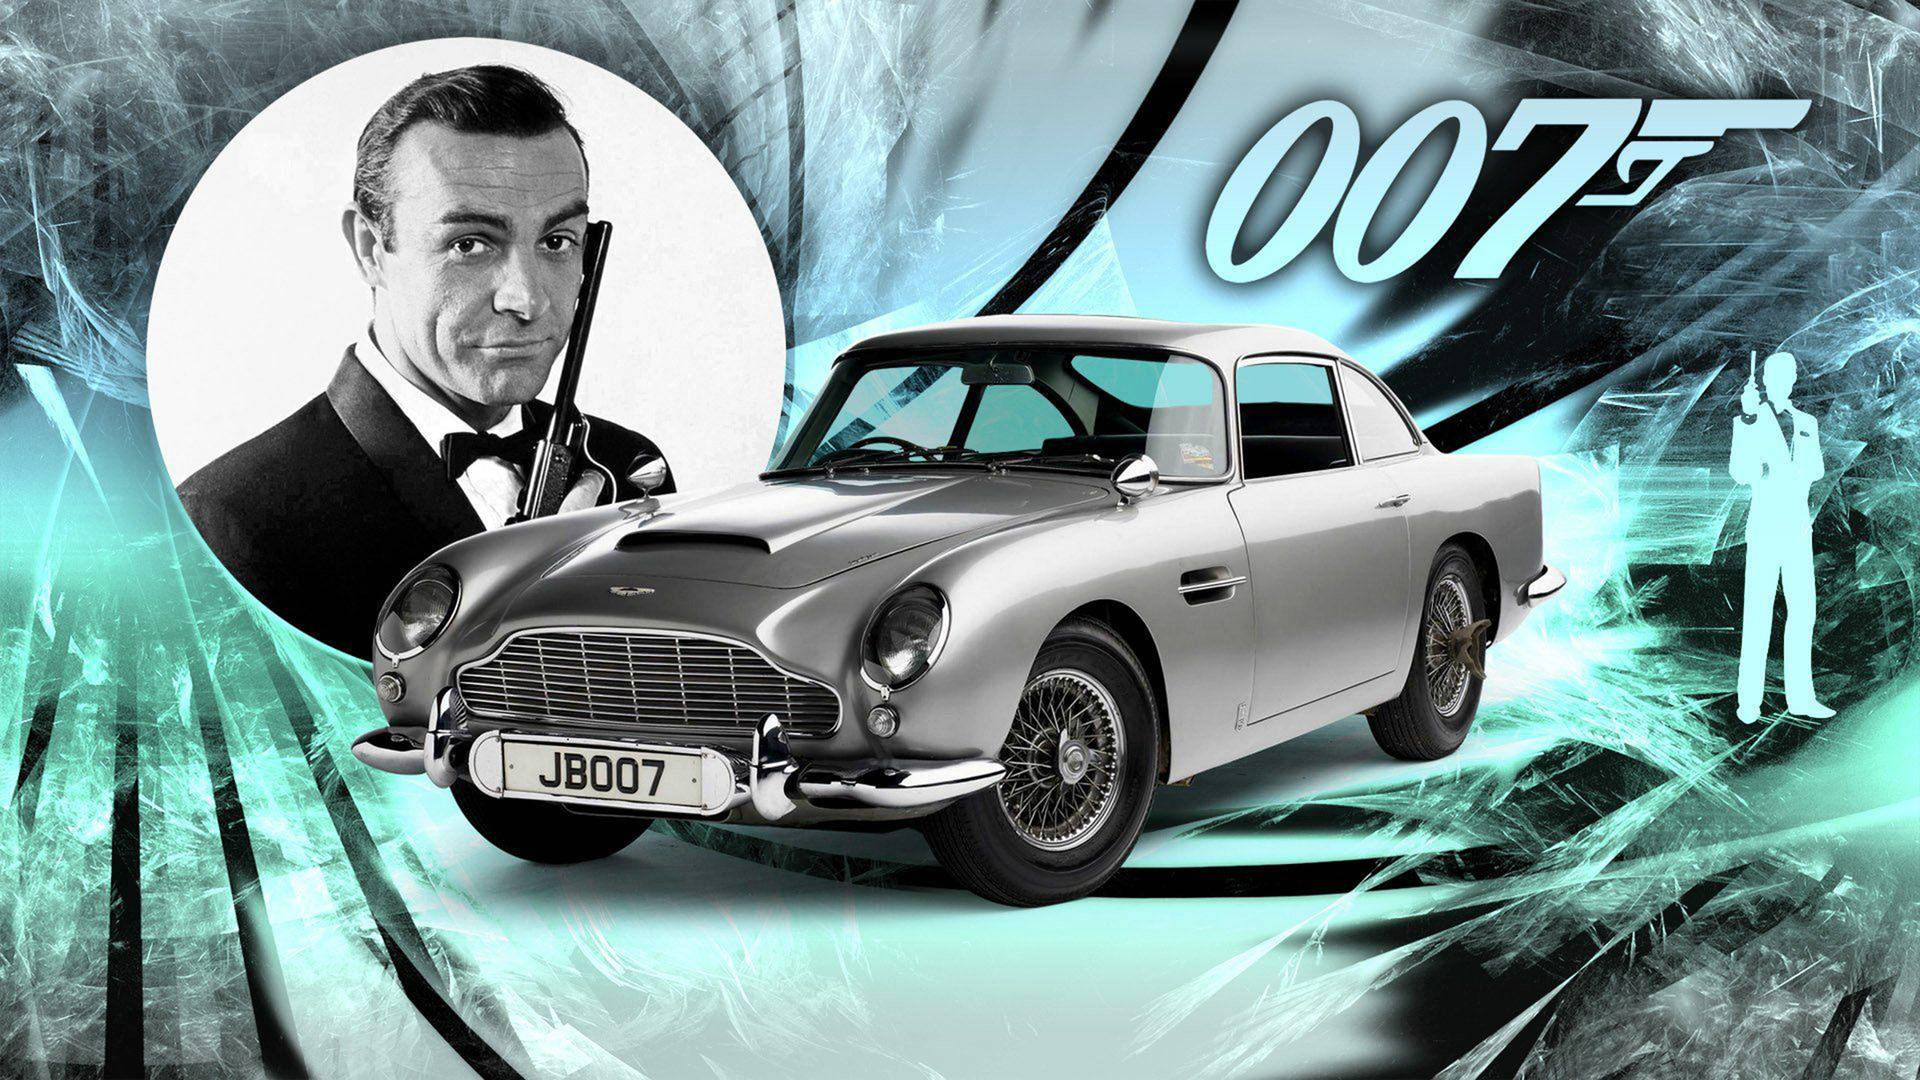 Sean Connery Spy Poster Background